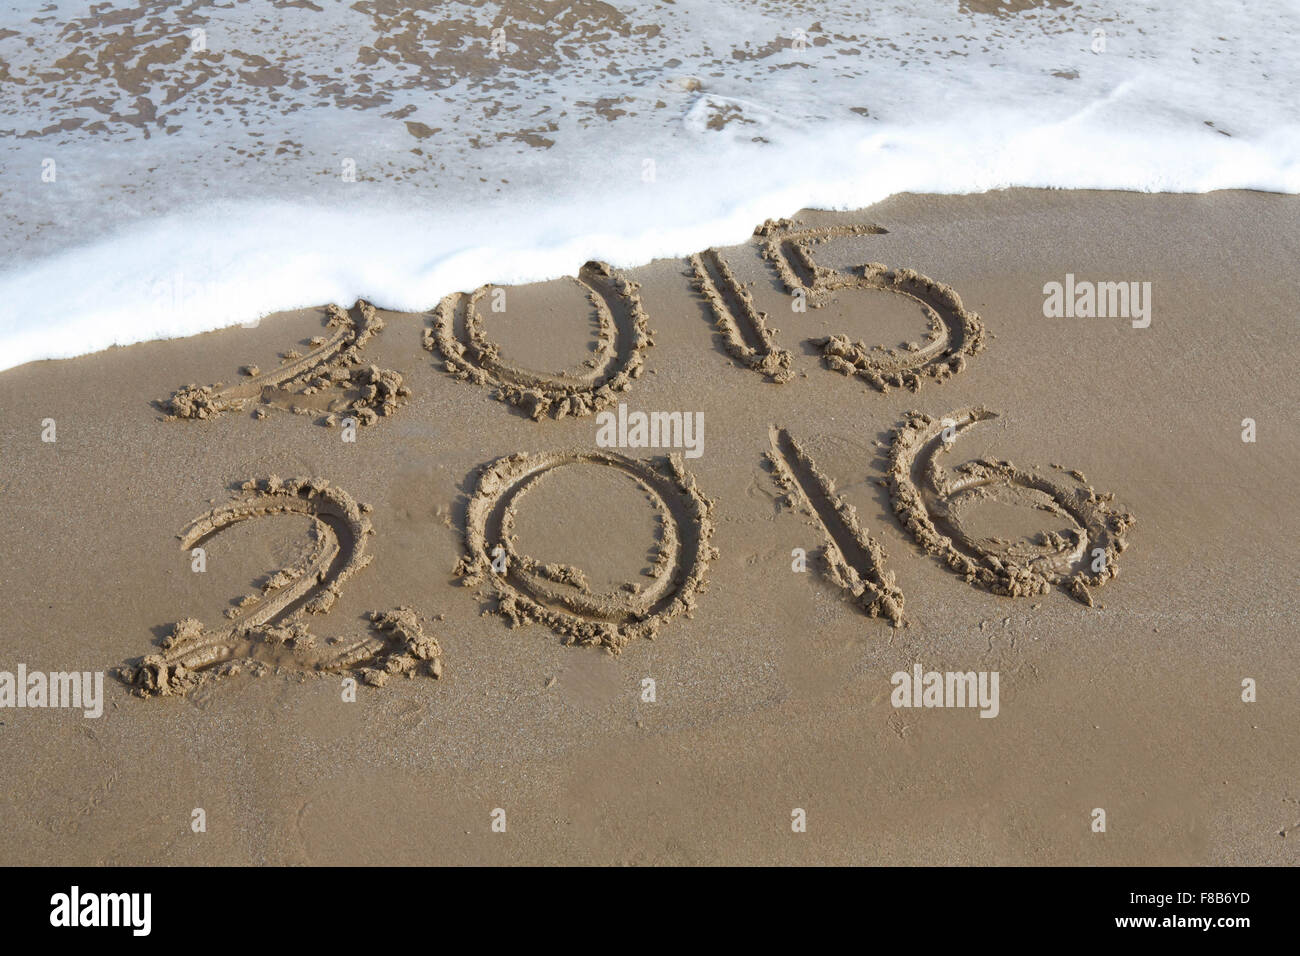 The new year is coming, with the date 2015 and 2016 written on a beach , with the year 2015 starting to be erased by a wave. Stock Photo